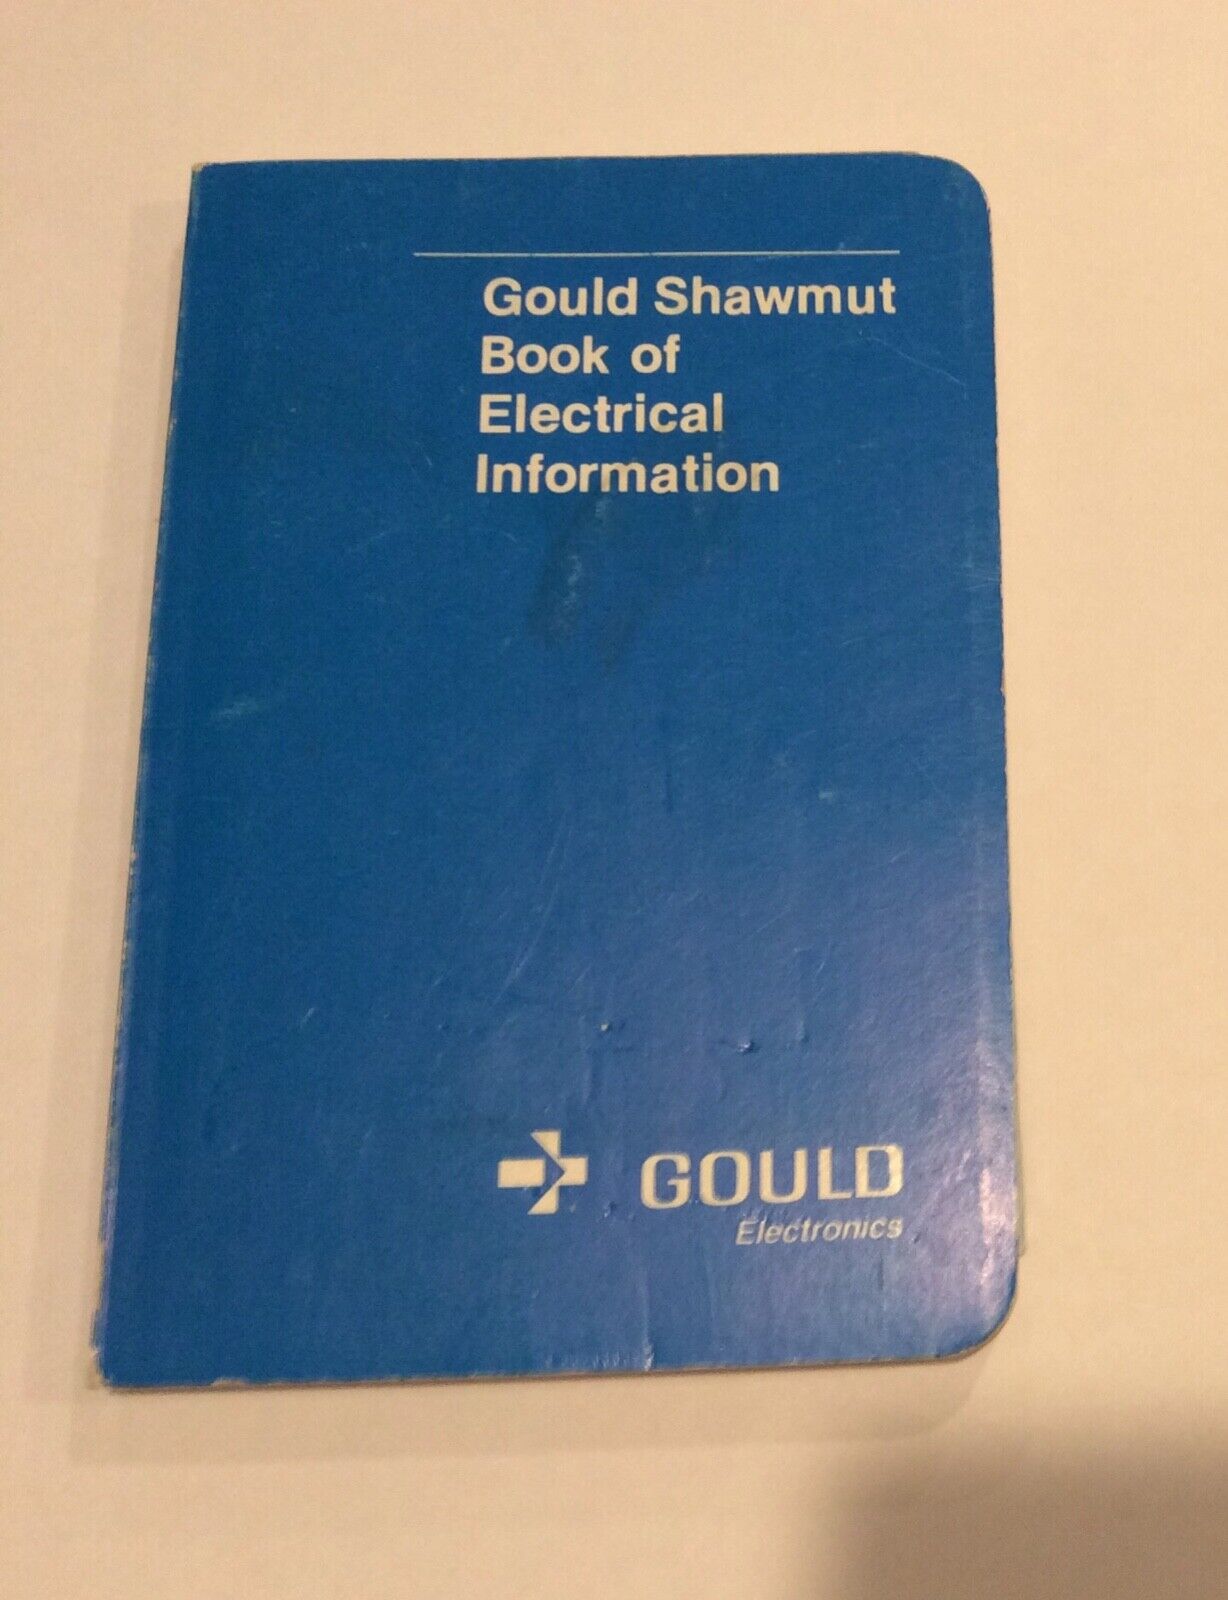 Gould Shawmut Book of Electrical Information by Gould Electronics